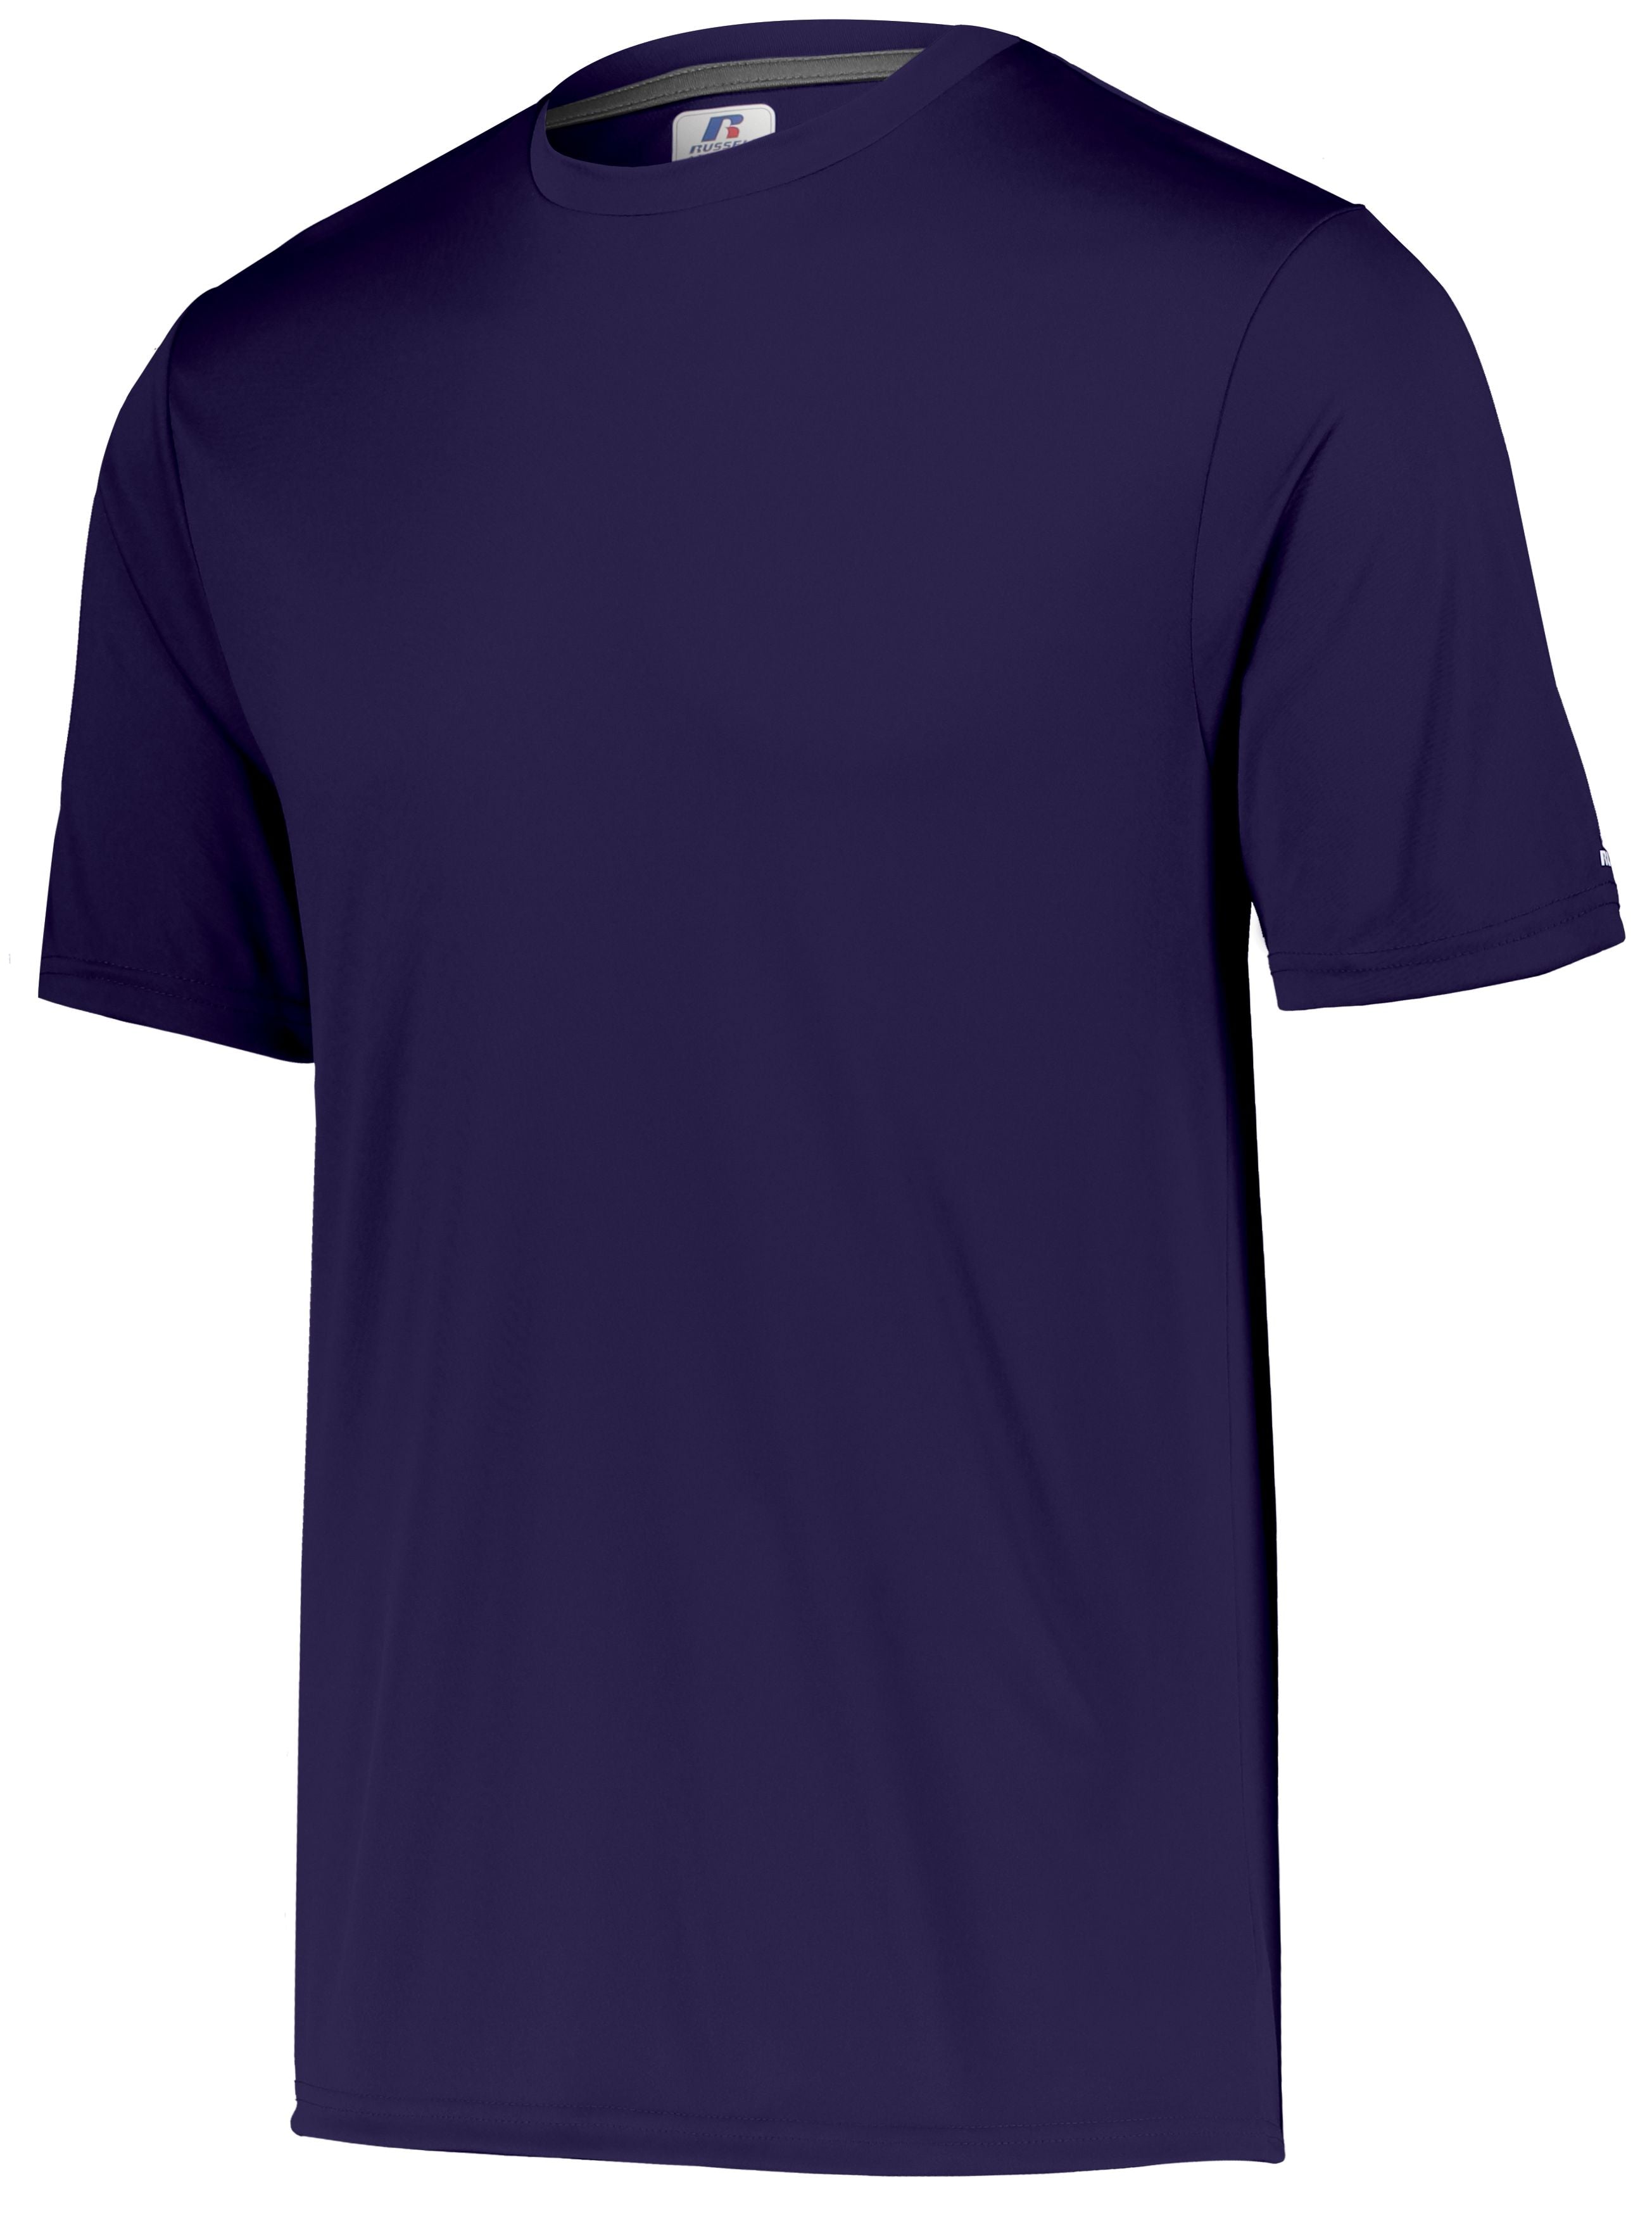 Russell Athletic Youth Dri-Power Core Performance Tee in Purple  -Part of the Youth, Youth-Tee-Shirt, T-Shirts, Russell-Athletic-Products, Shirts product lines at KanaleyCreations.com